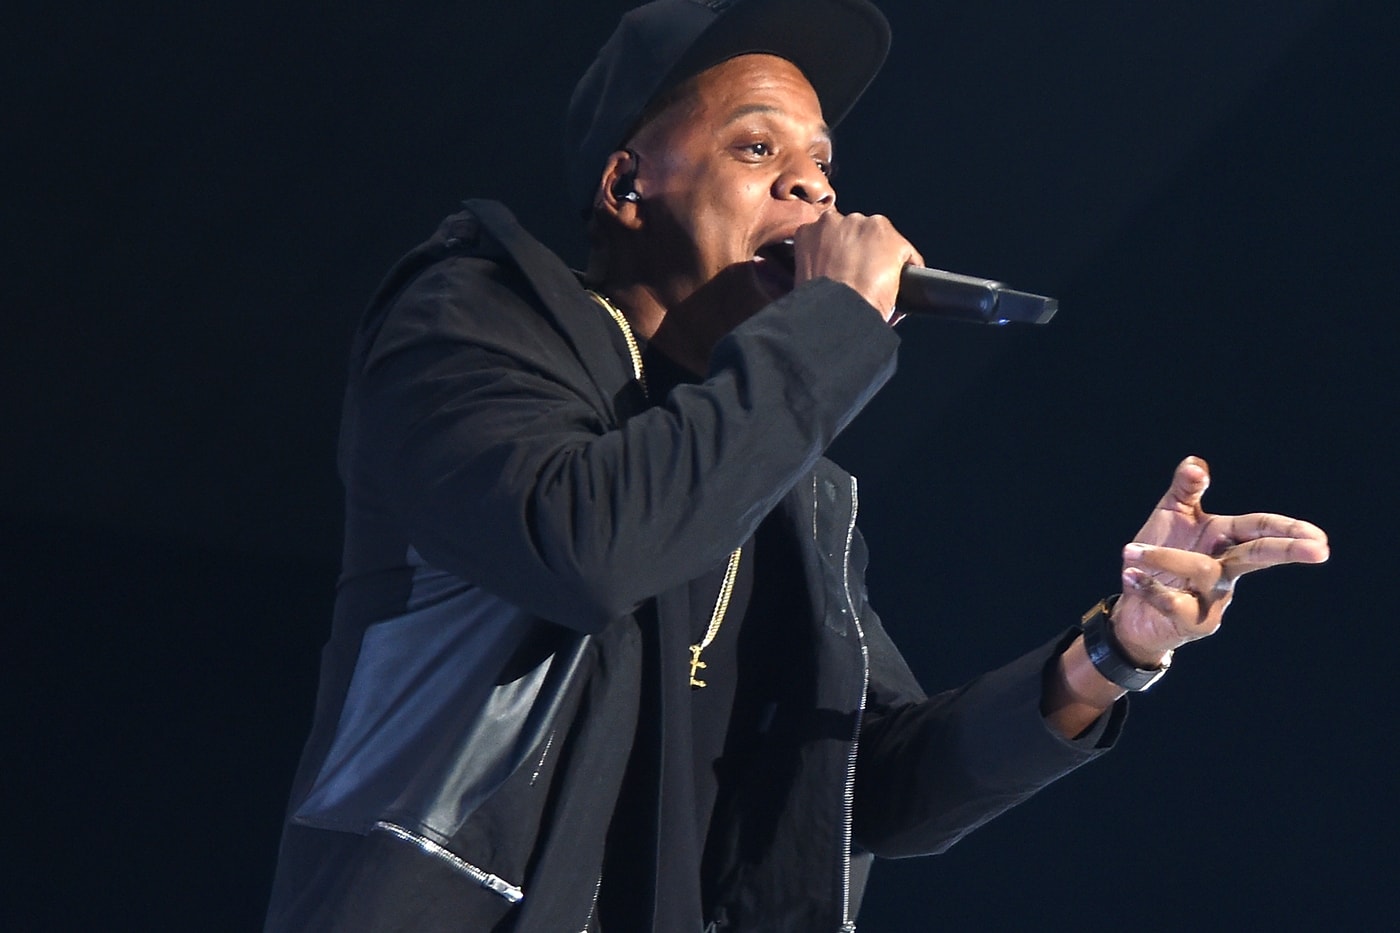 jay-z-performs-on-saturday-night-live